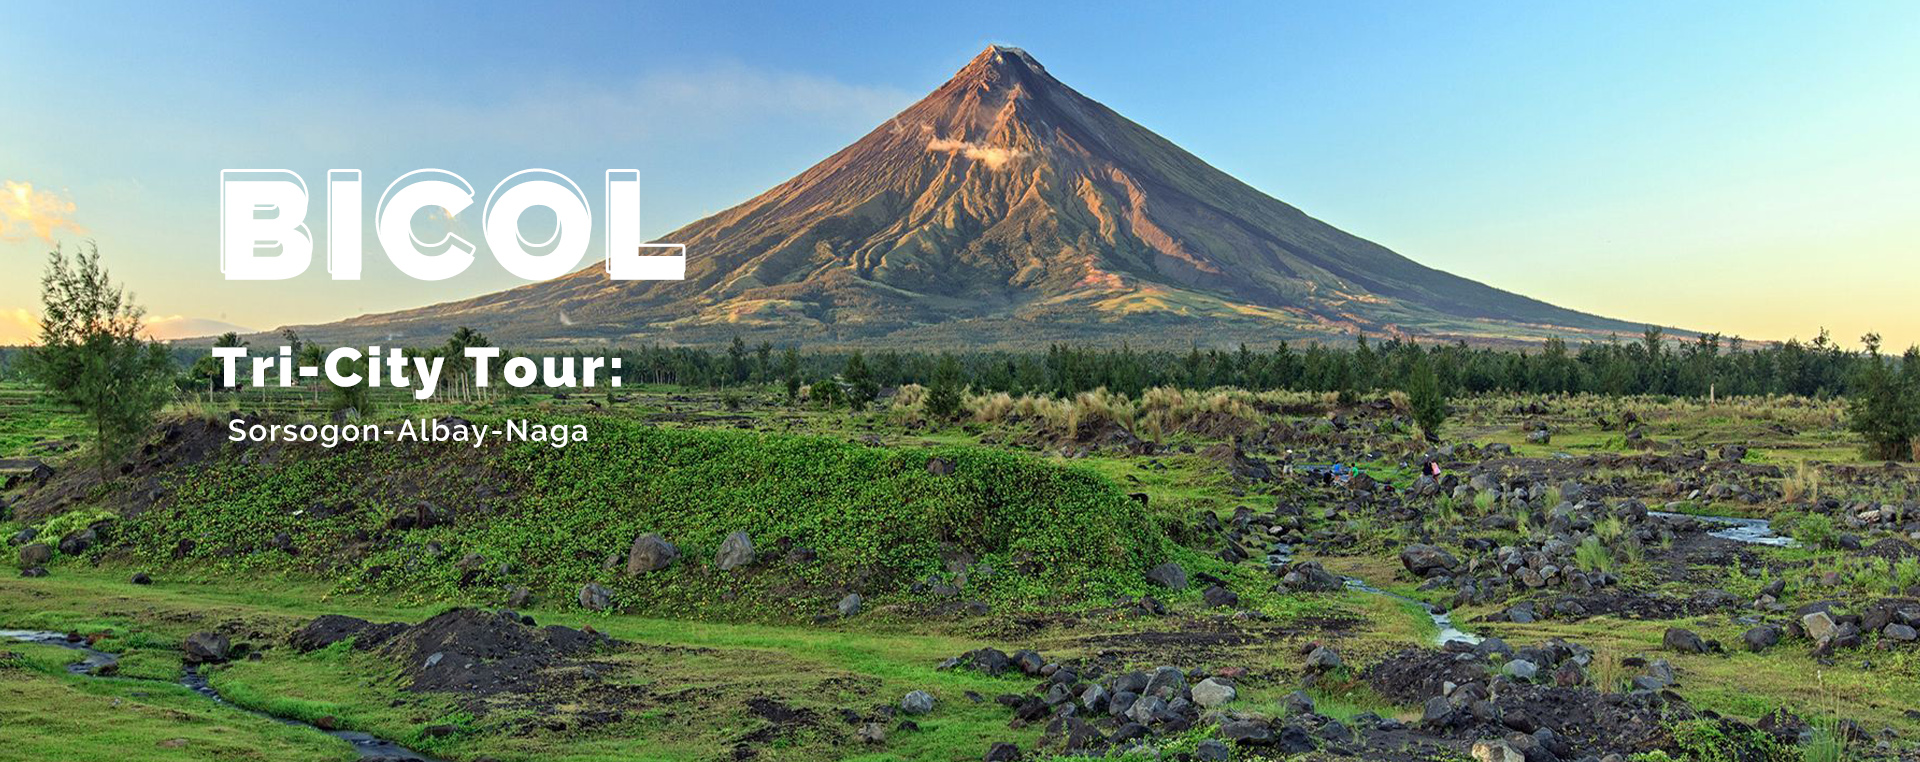 Bicol Tri City Tour Package Harry Travel And Tours